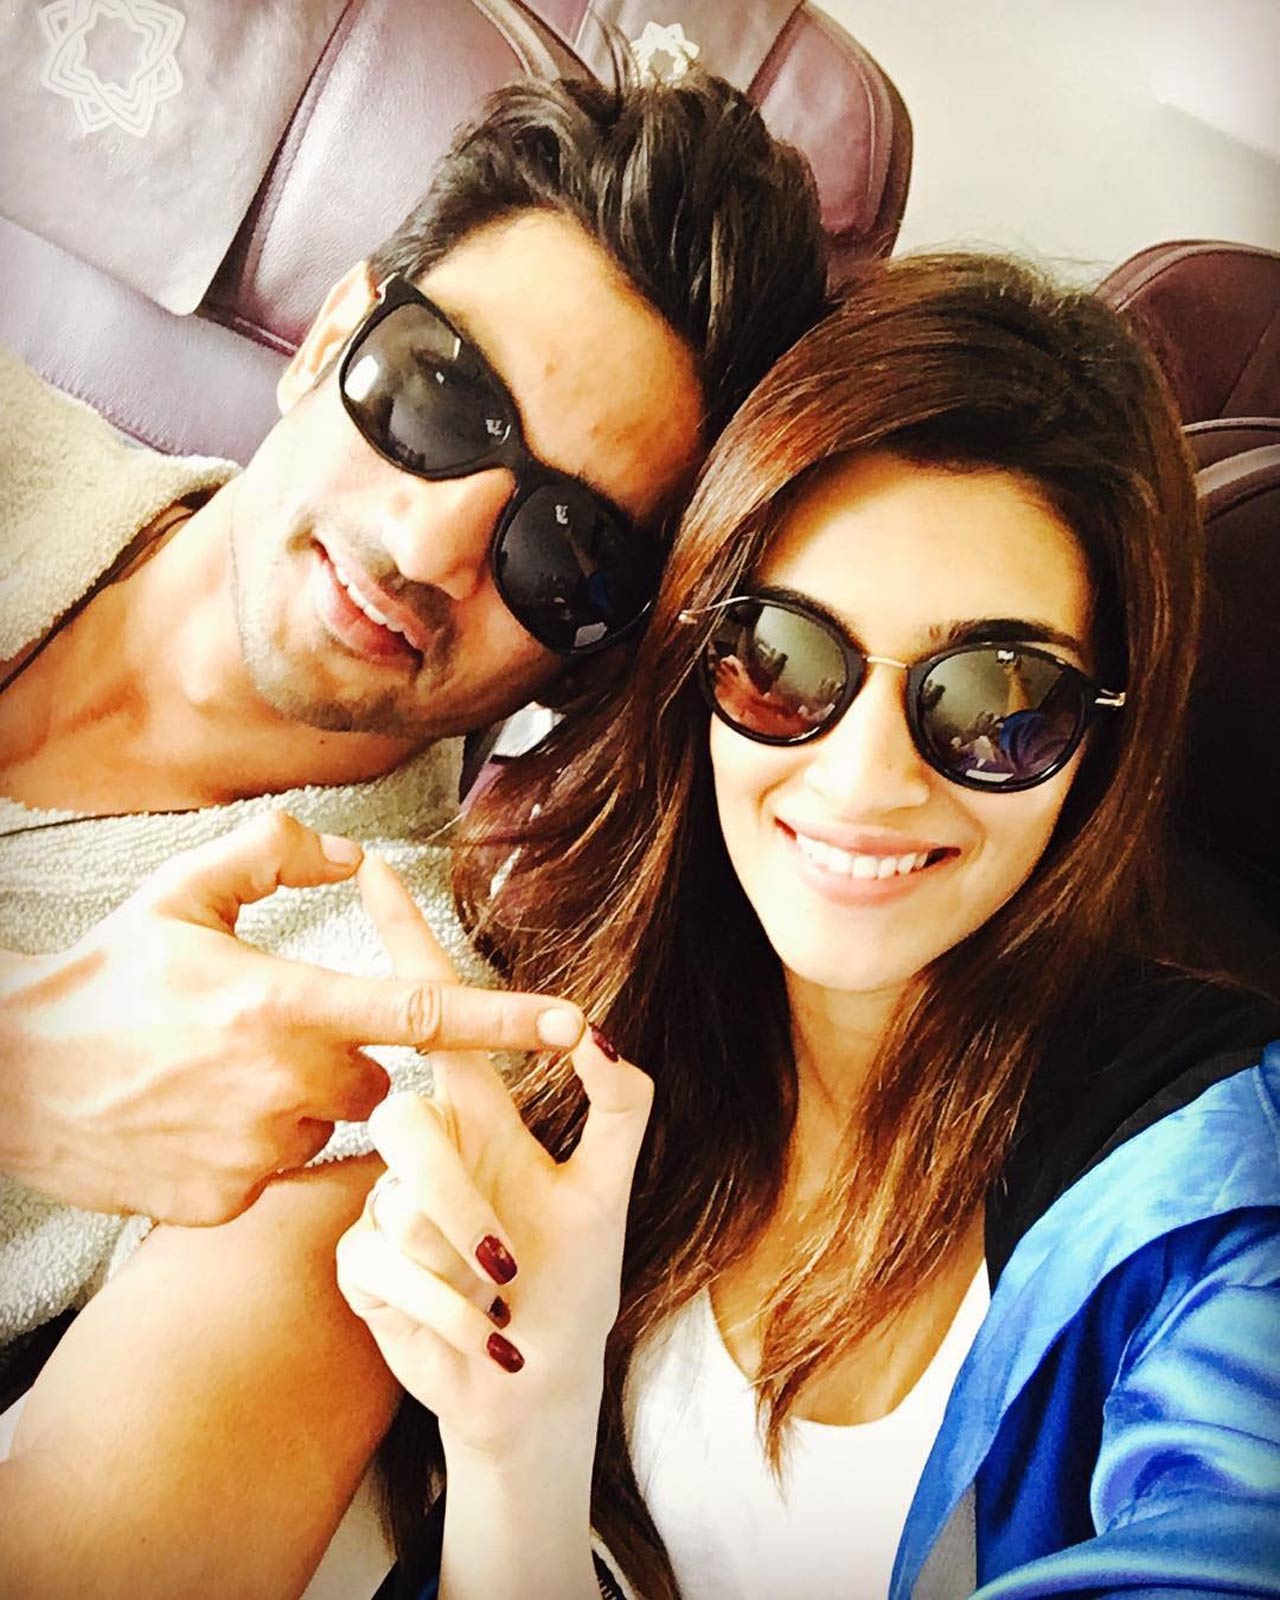 Kriti Sanon and Sushant Singh Rajput jetted to Jalandhar and on the flight, the actress shared this adorable selfie. The duo truly looks stunning in this click